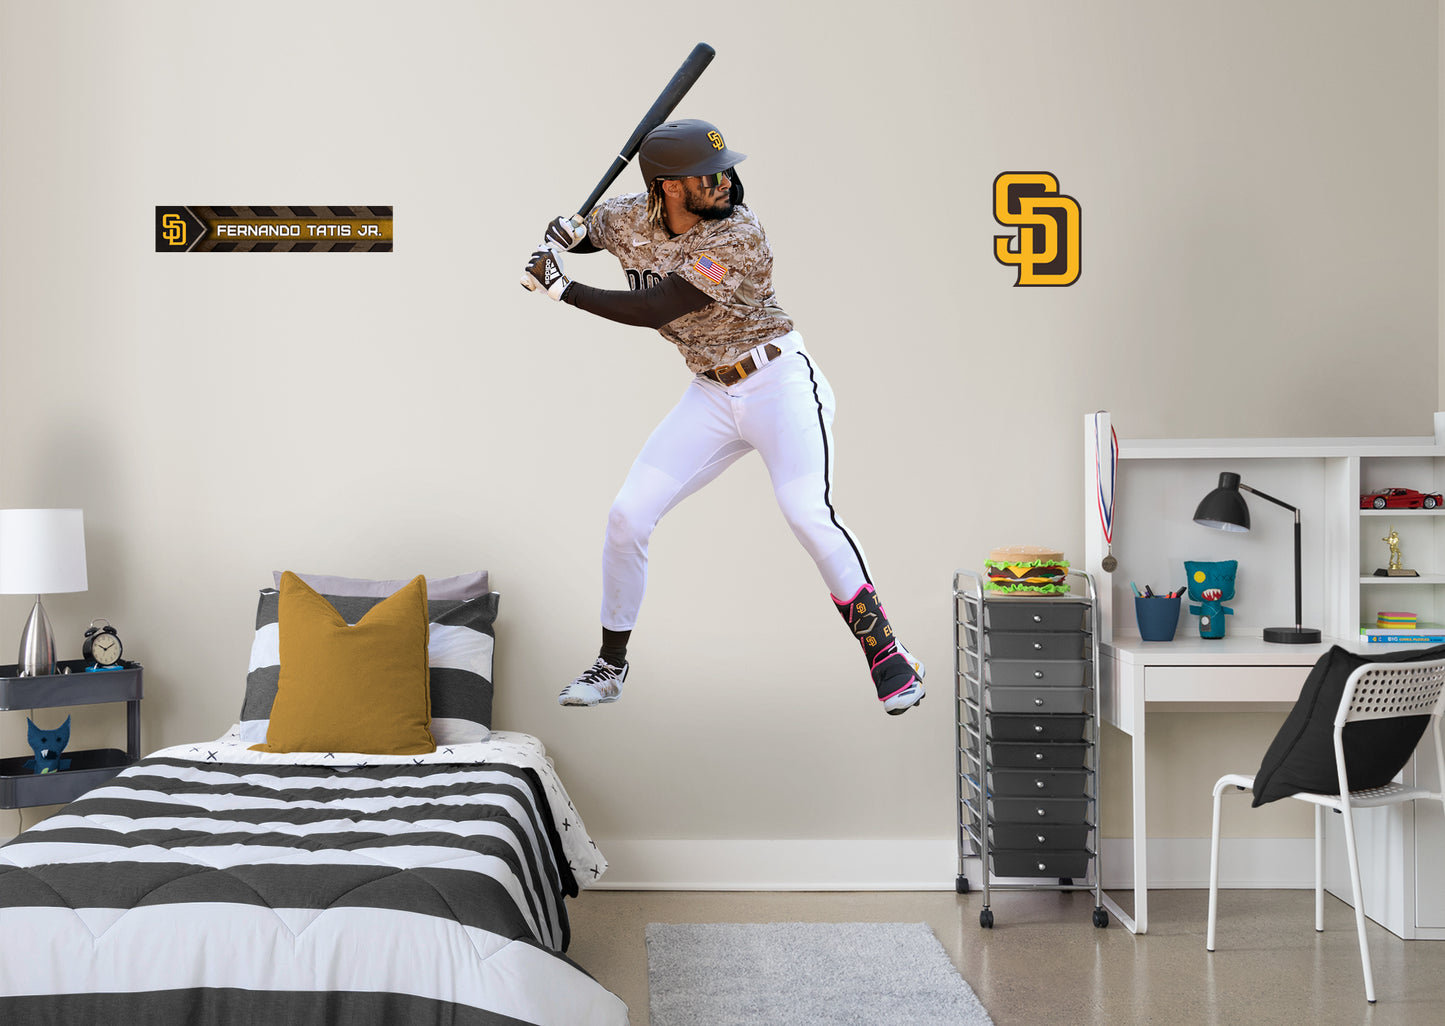 San Diego Padres: Fernando Tatis Jr. 2021 Camo        - Officially Licensed MLB Removable Wall   Adhesive Decal